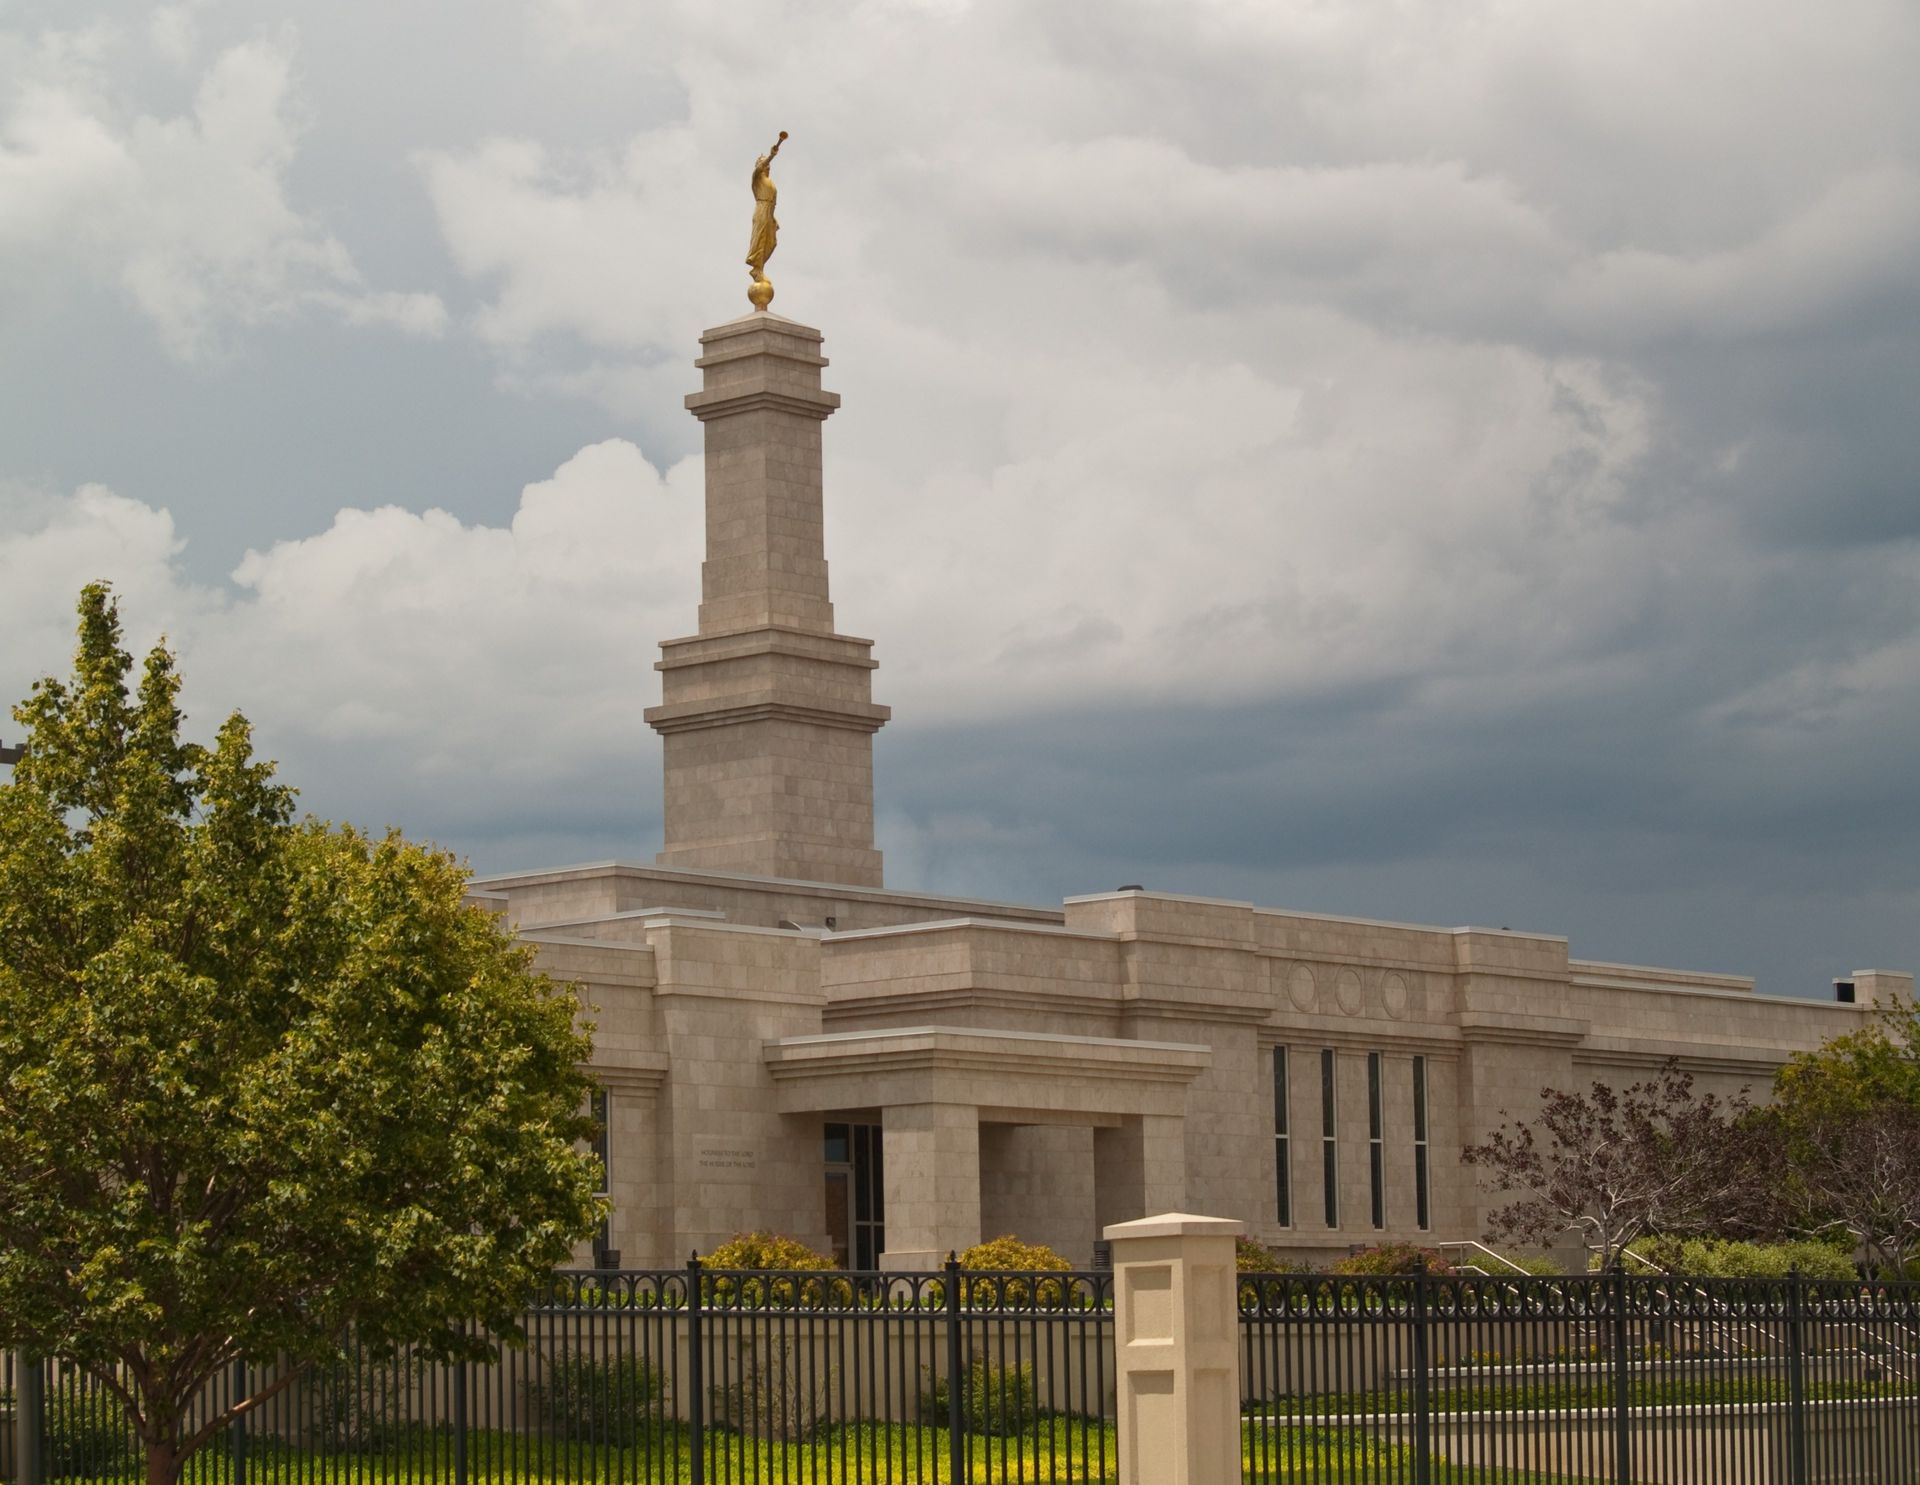 The Monticello Utah Temple spire, including the entrance and scenery.